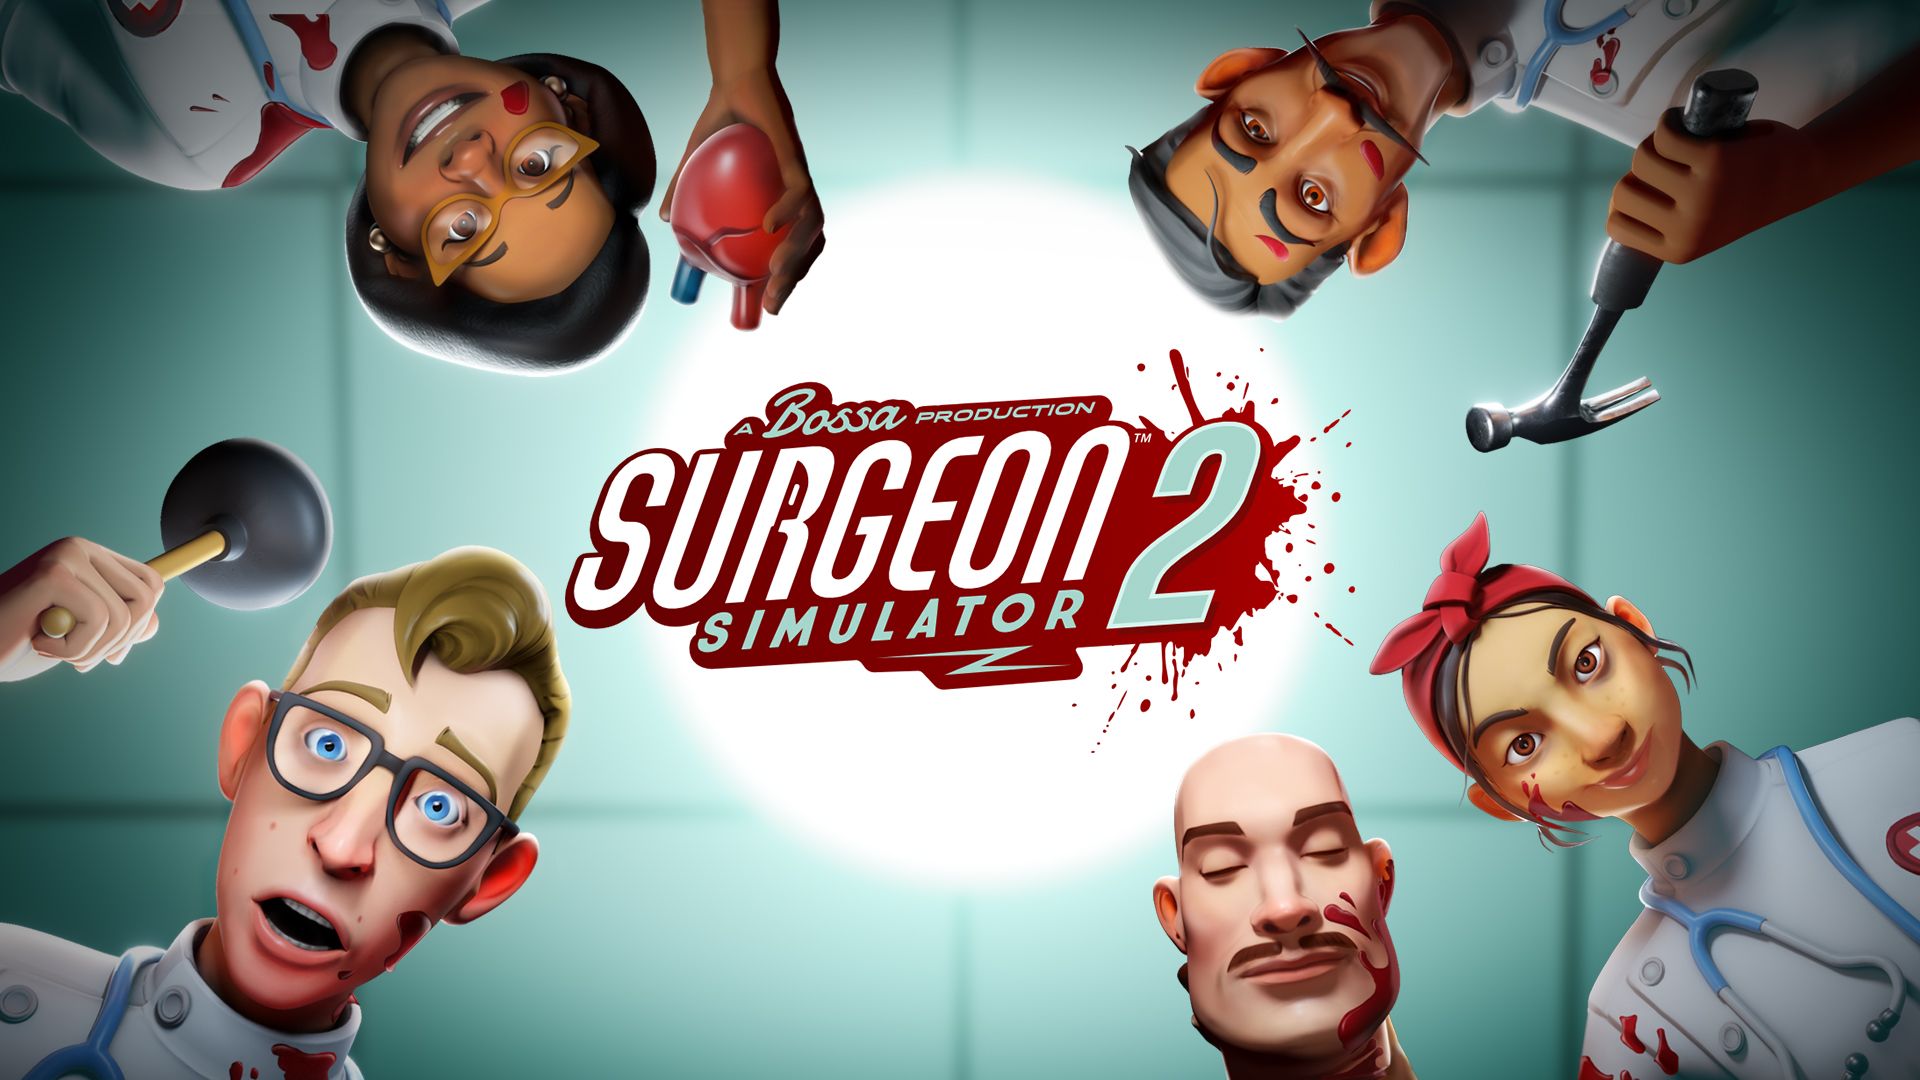 Back To The Future’s Doc Brown Launches Surgeon Simulator 2